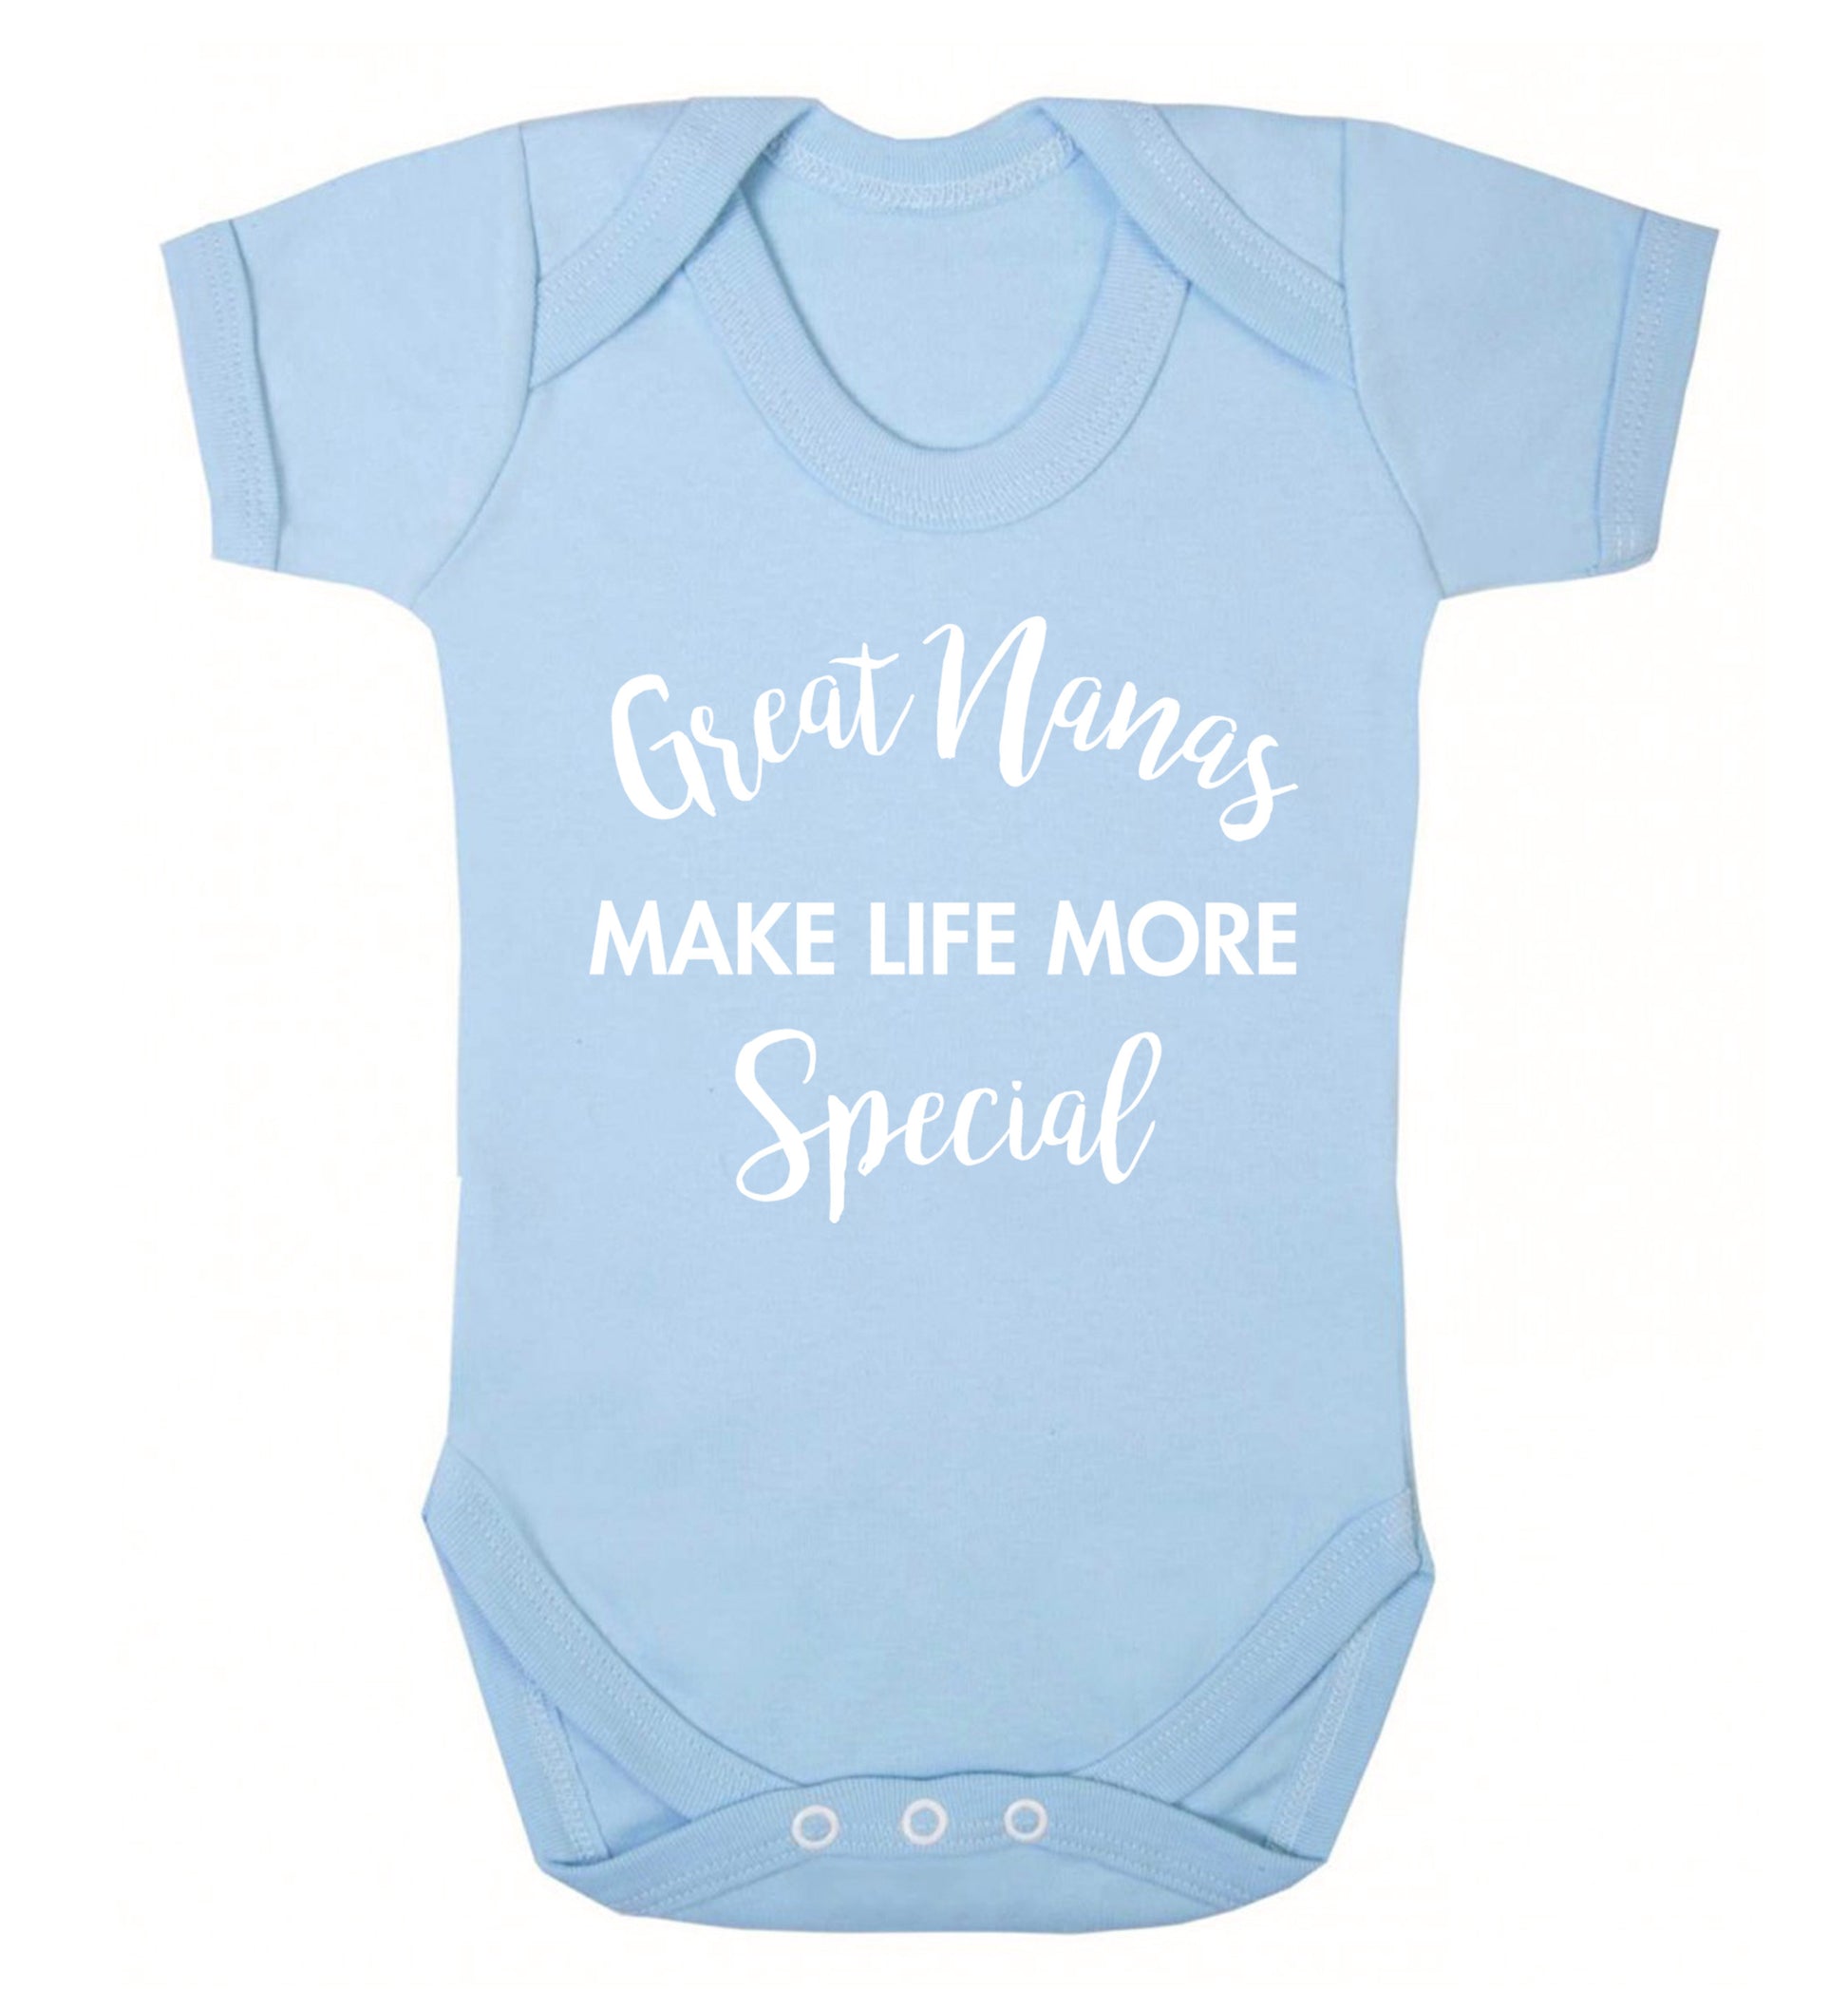 Great nanas make life more special Baby Vest pale blue 18-24 months